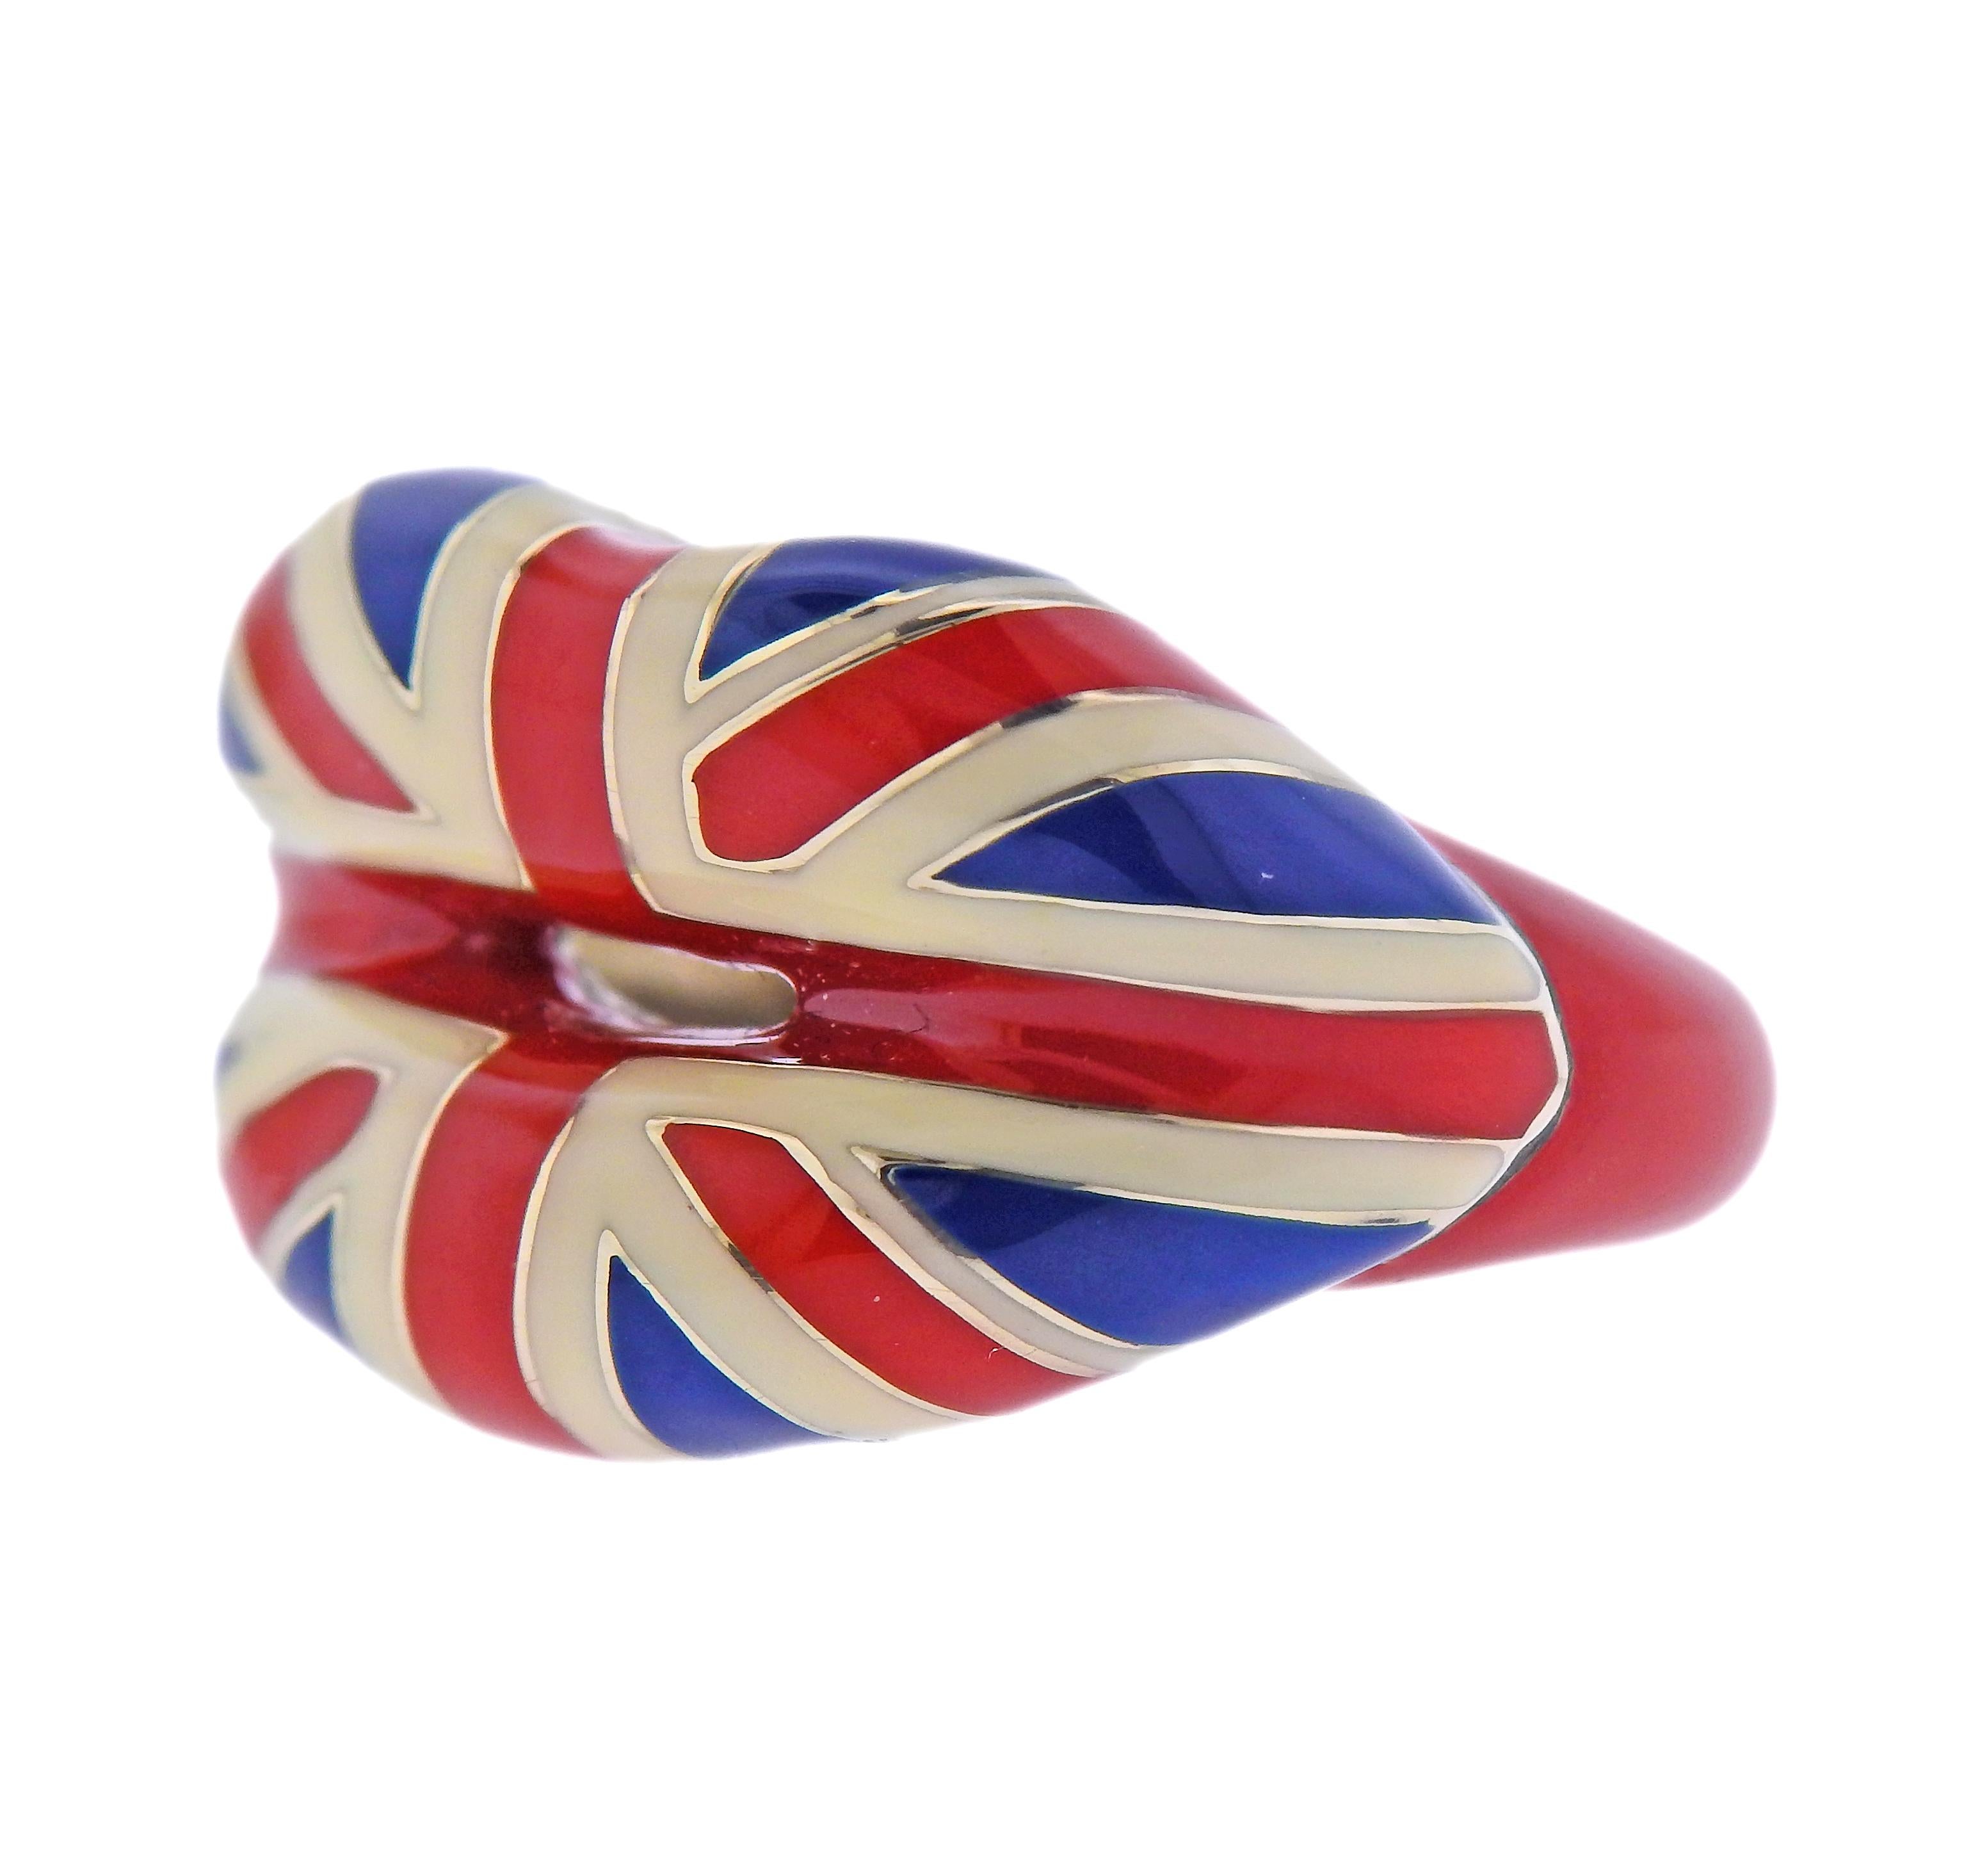 New with tag sterling silver lips ring by Solange Azagury-Partridge, with Union Jack flag enamel. Ring size - 6.25, top is 16mm wide. Marked 925 and with English maker's marks. Retail $1650. Weight - 11.2 grams.